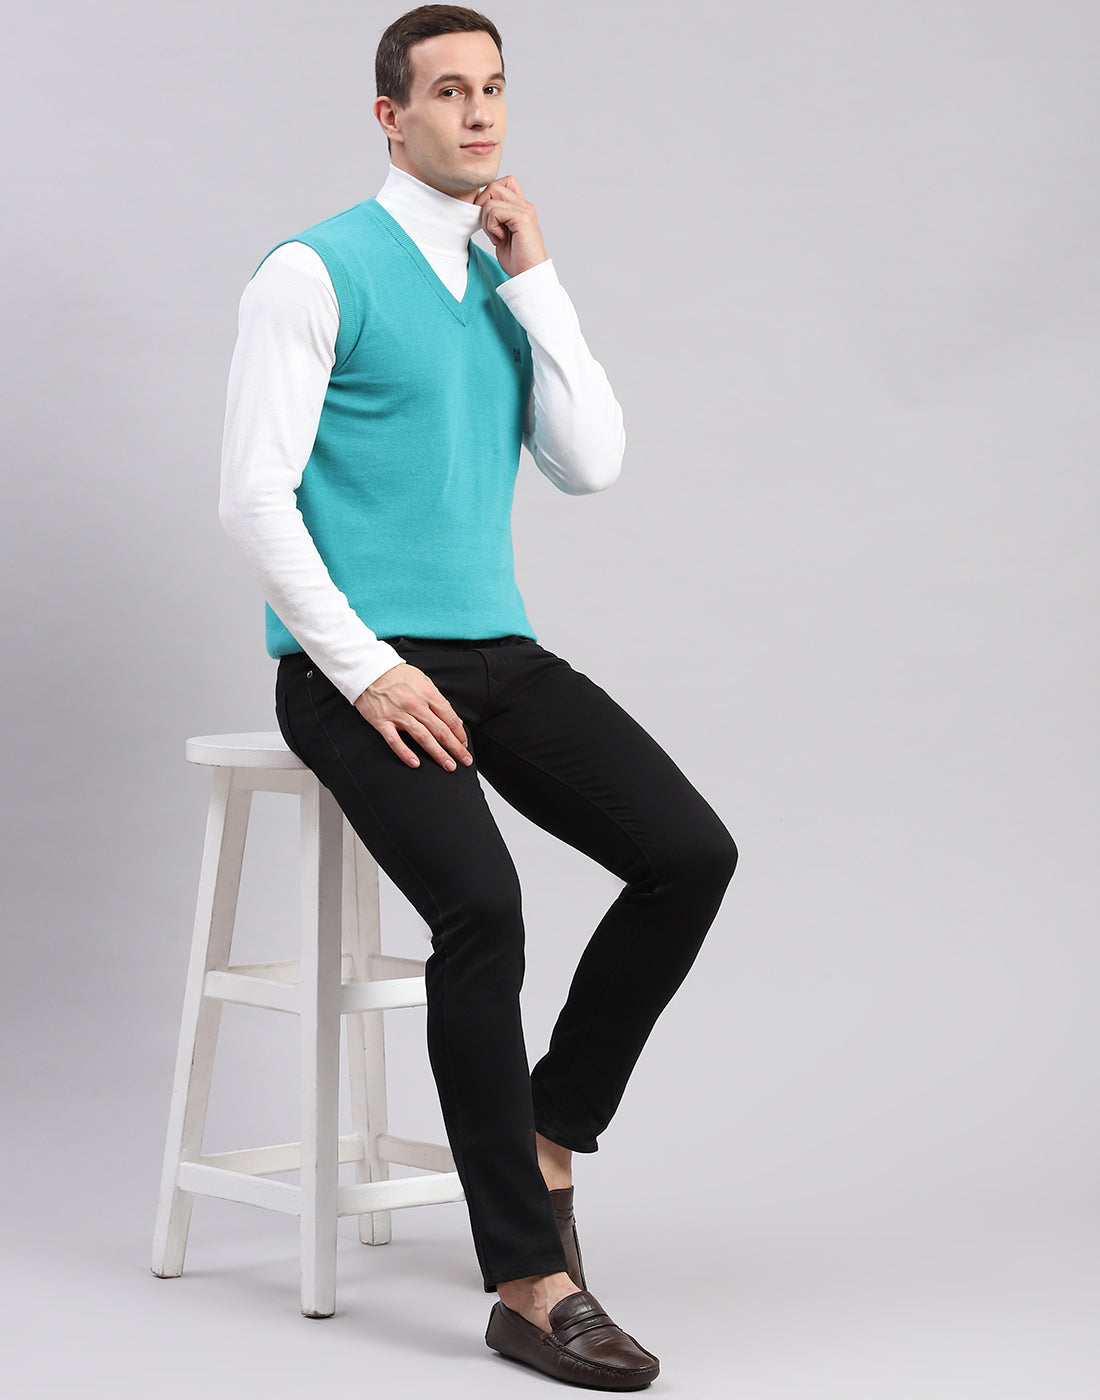 Men Turquoise Blue Solid V Neck Sleeveless Sweaters/Pullovers